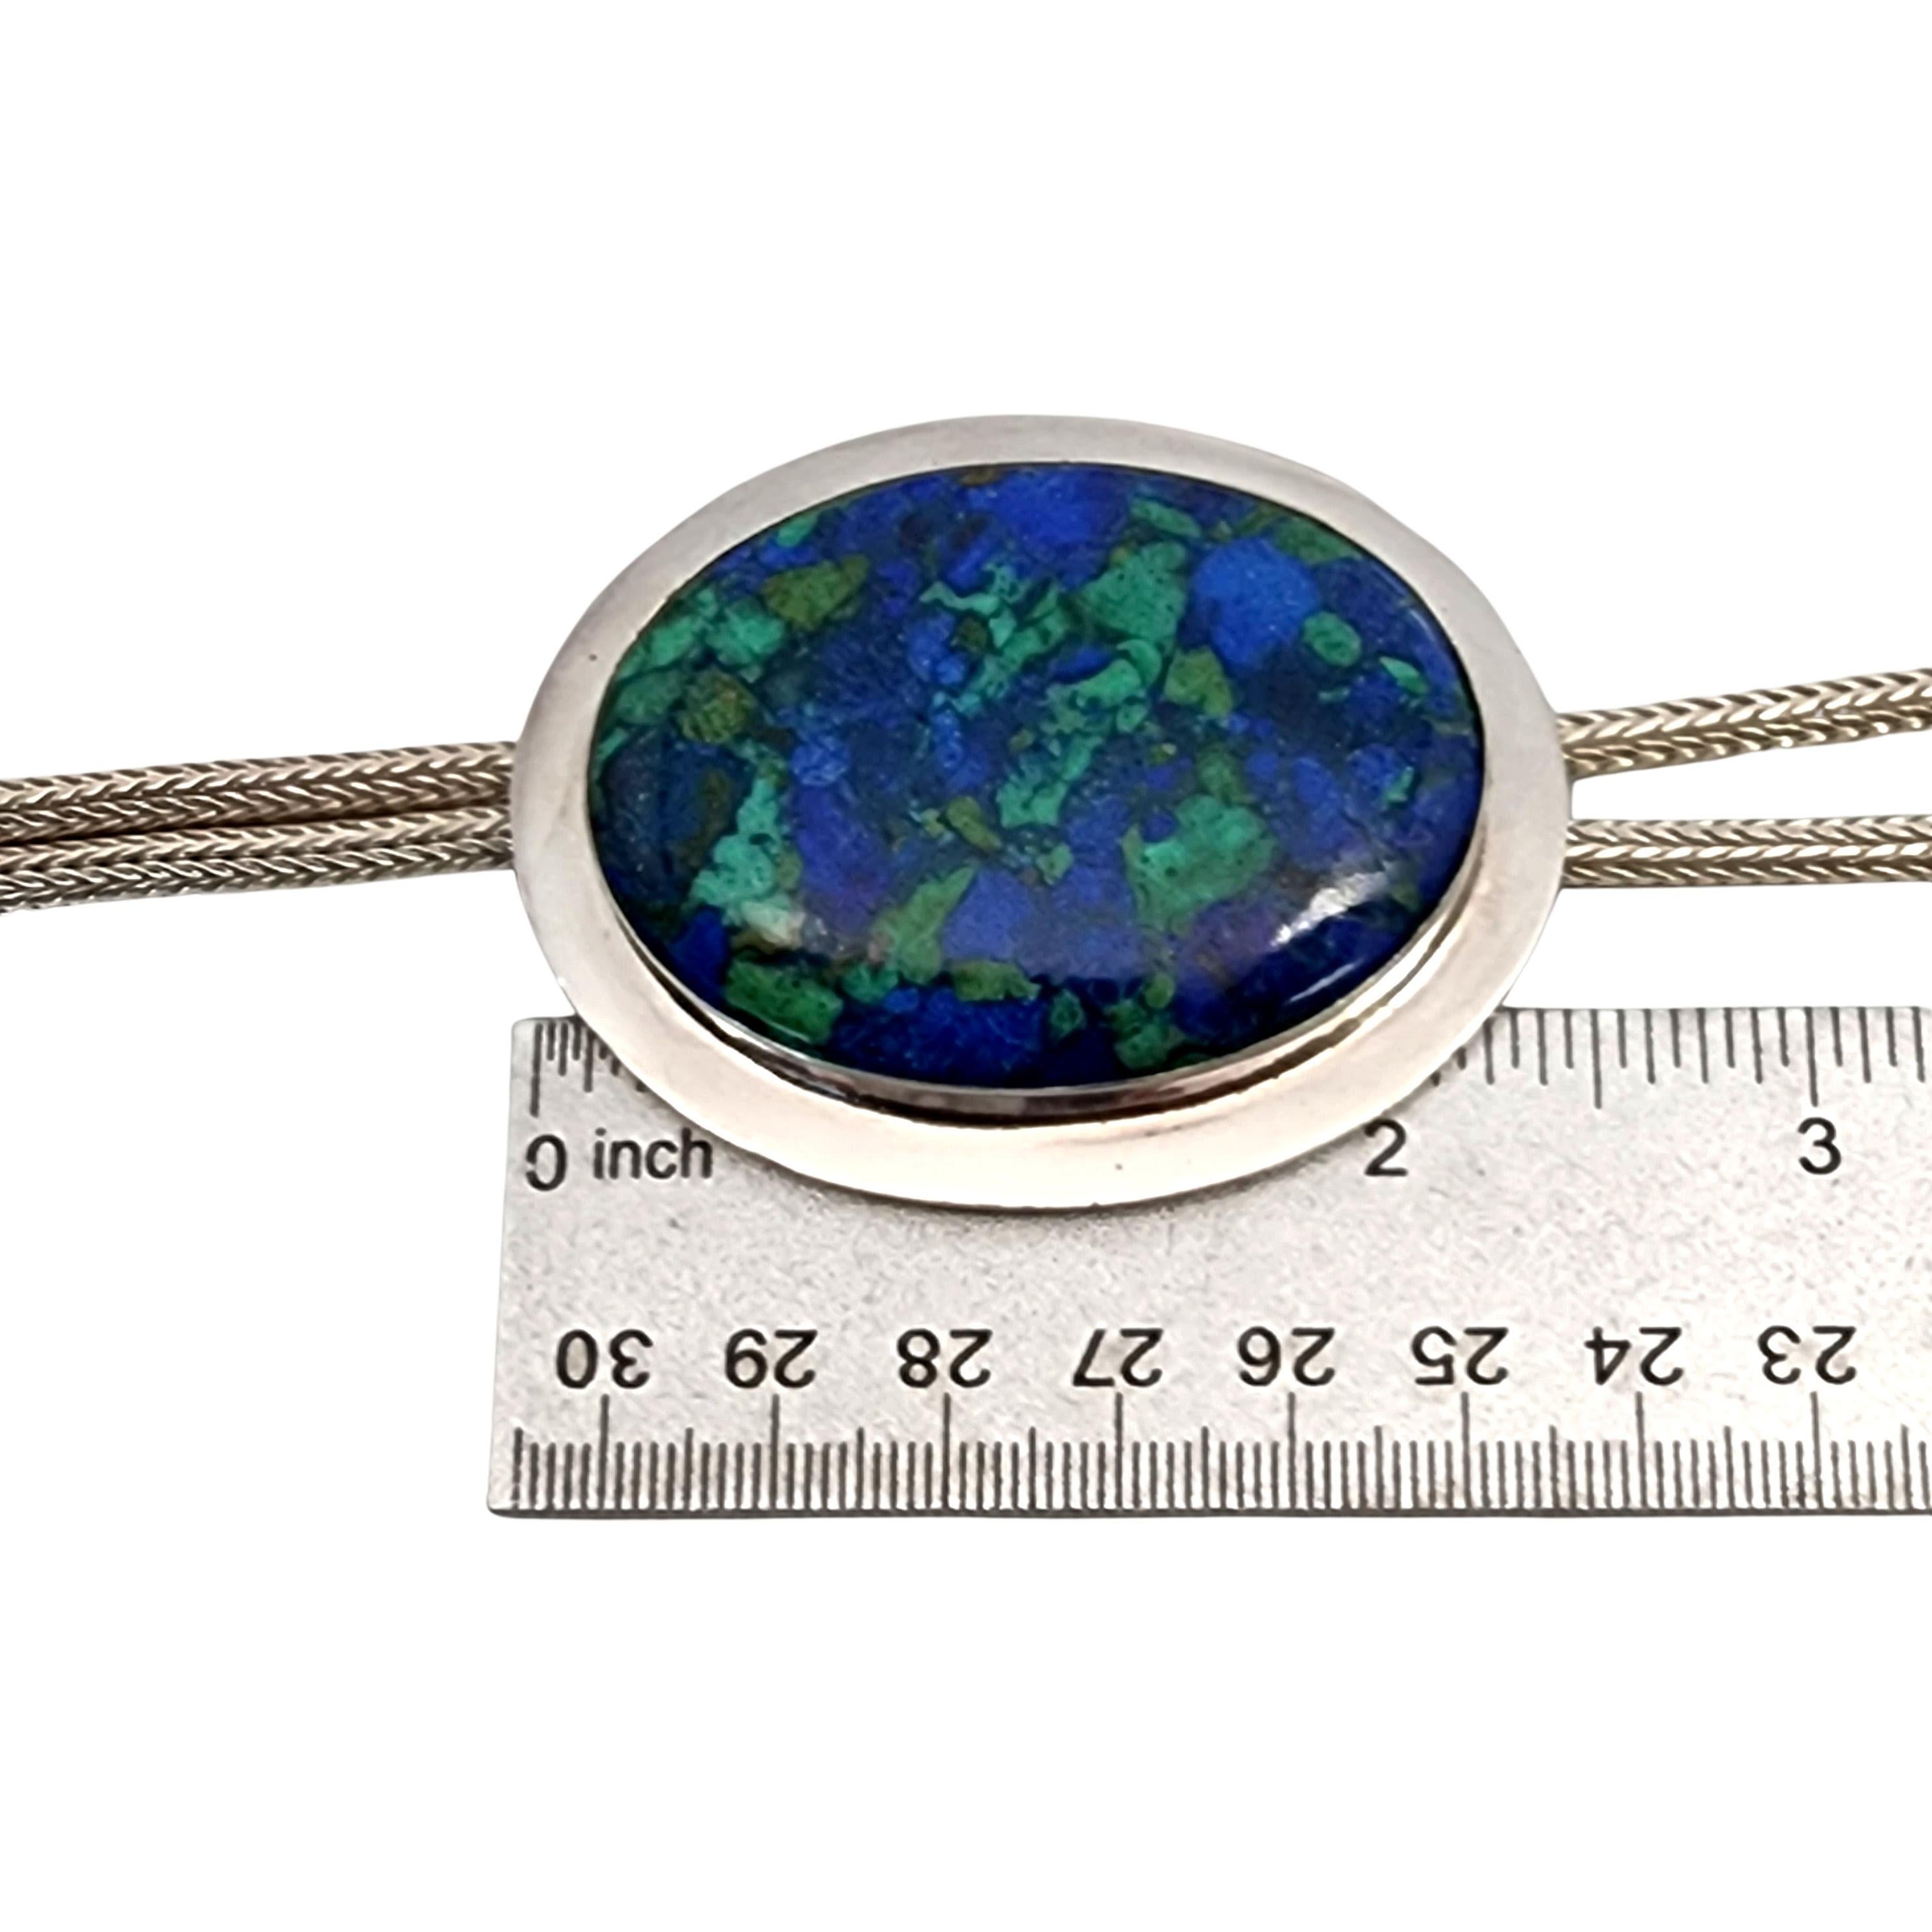 Sterling silver azurite malachite bolo tie by Suarti.

This handcrafted artisan piece features a round woven chain with cylinder tips. The large beautiful oval shaped azurite malachite stone is bezel set in the highly polished bolo focal